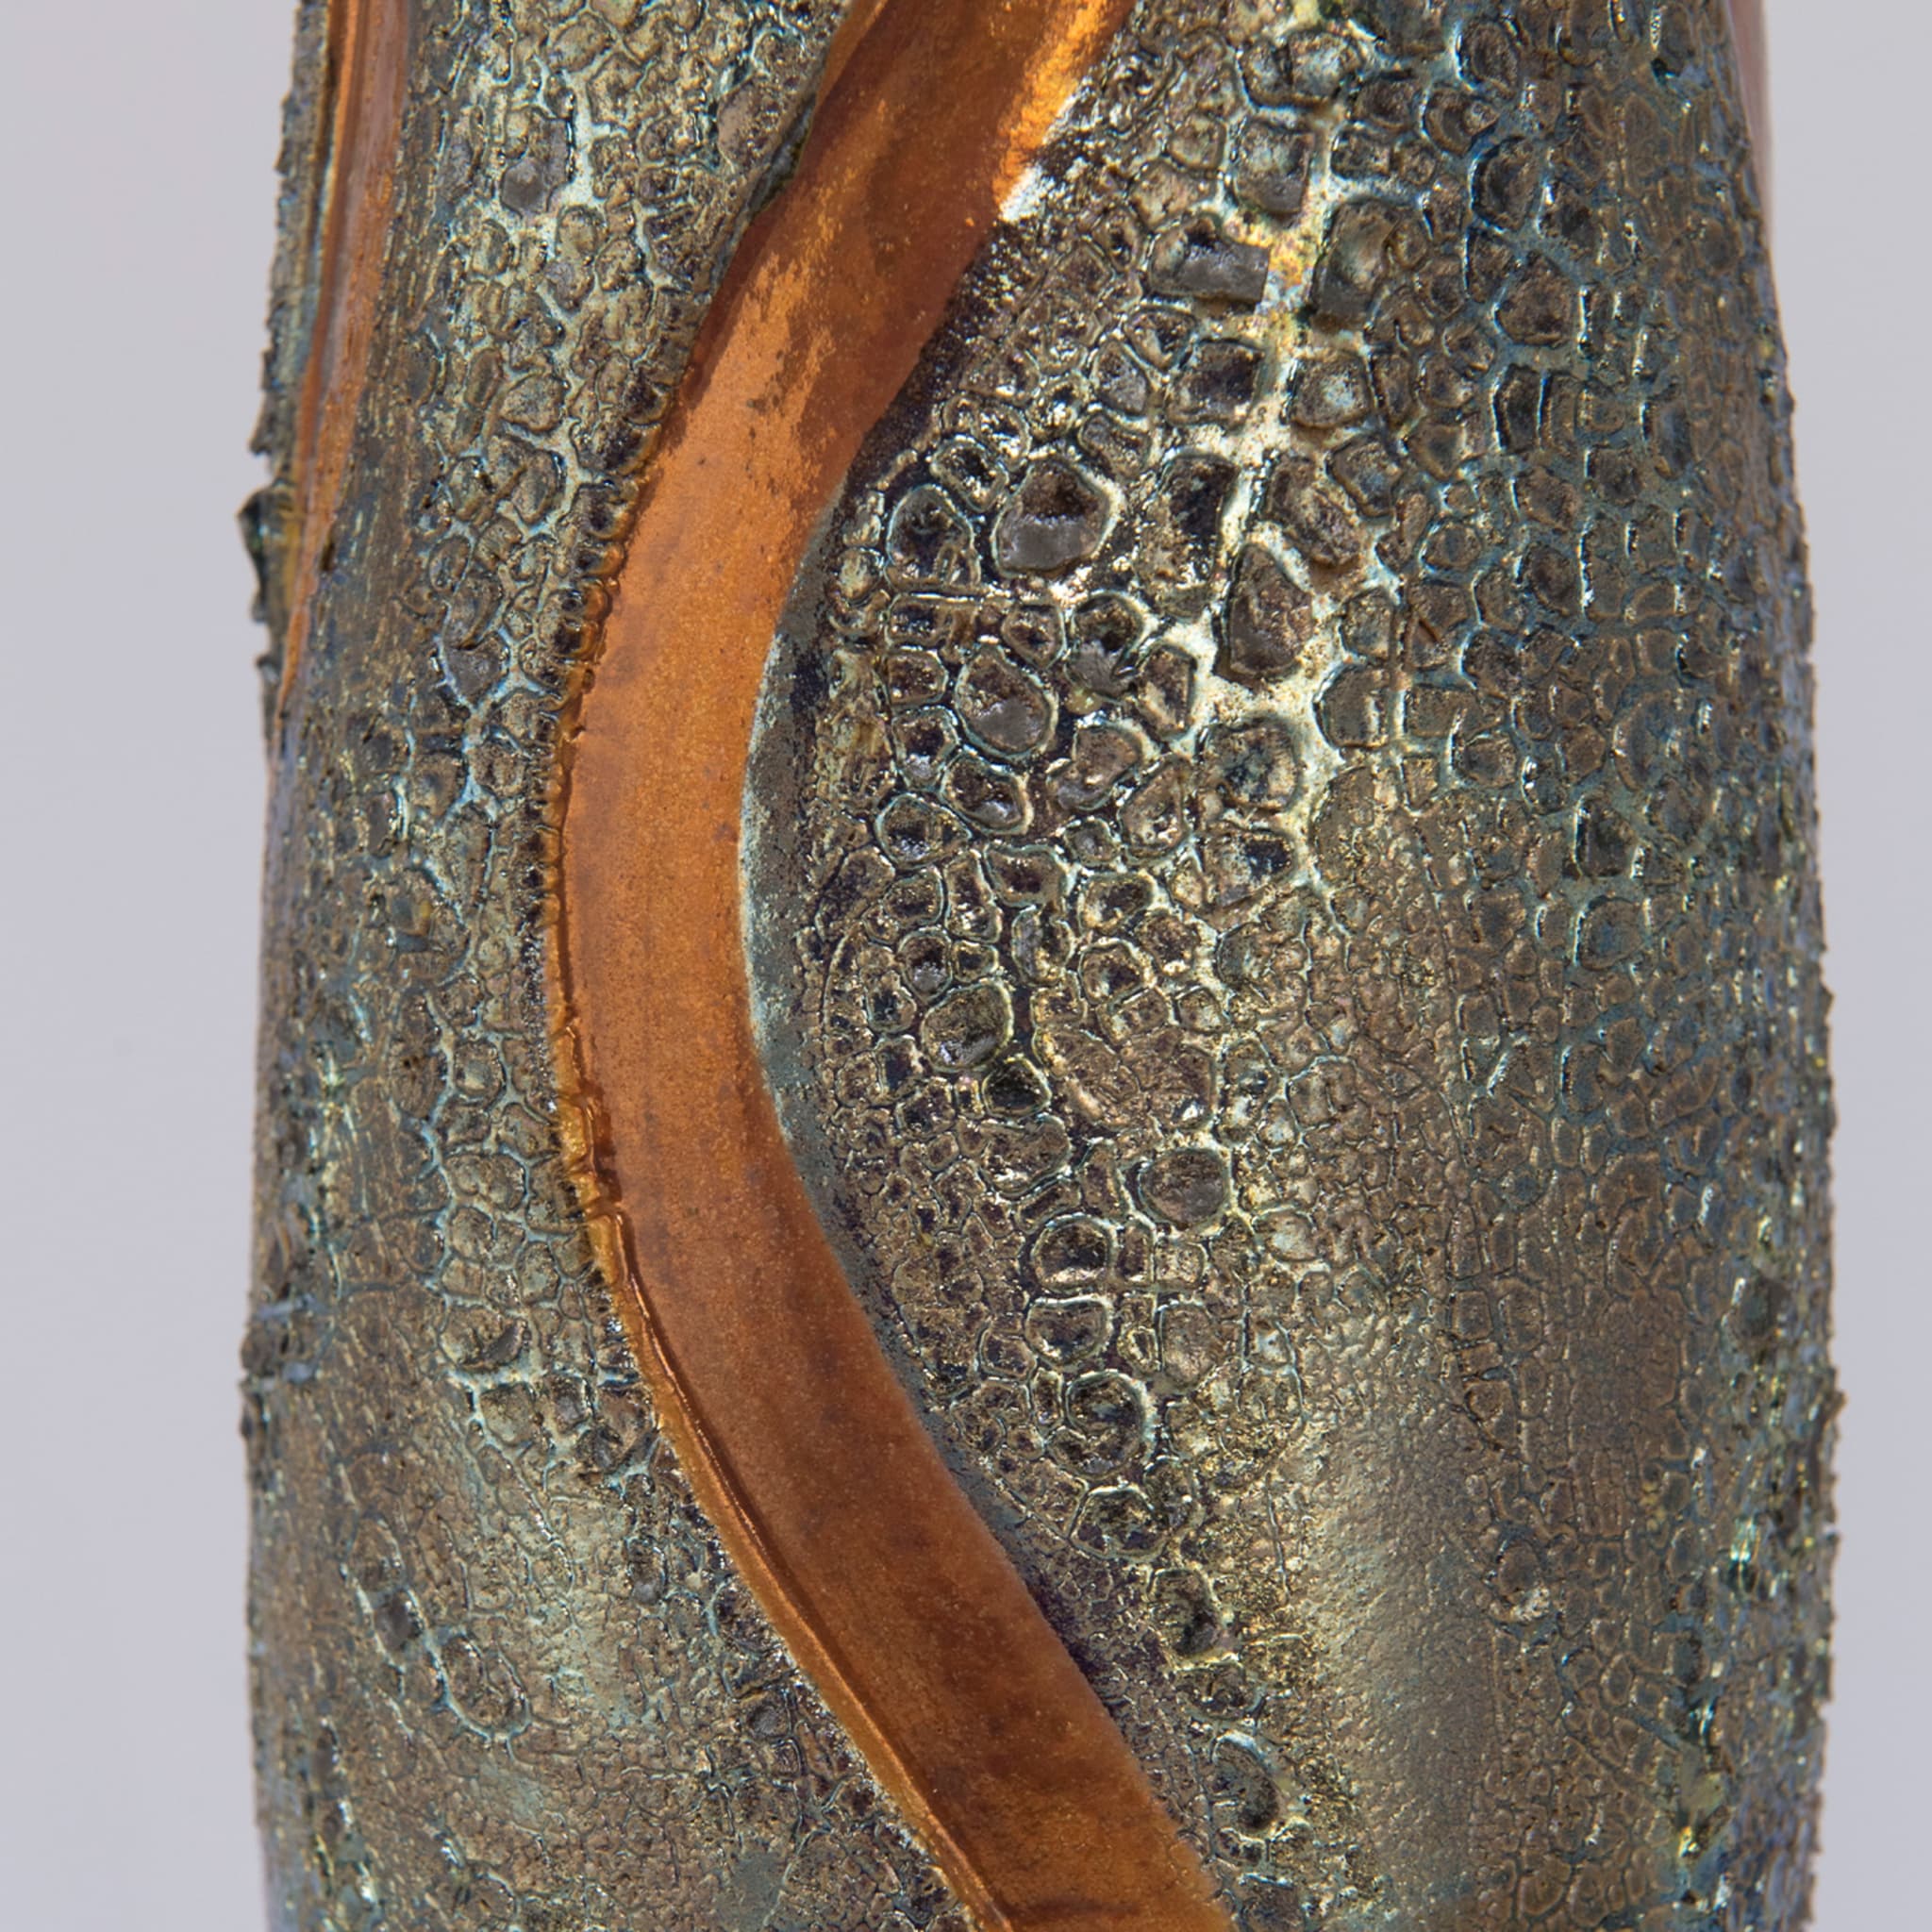 Copper and Silver Lustre with Crust Vase - Alternative view 4